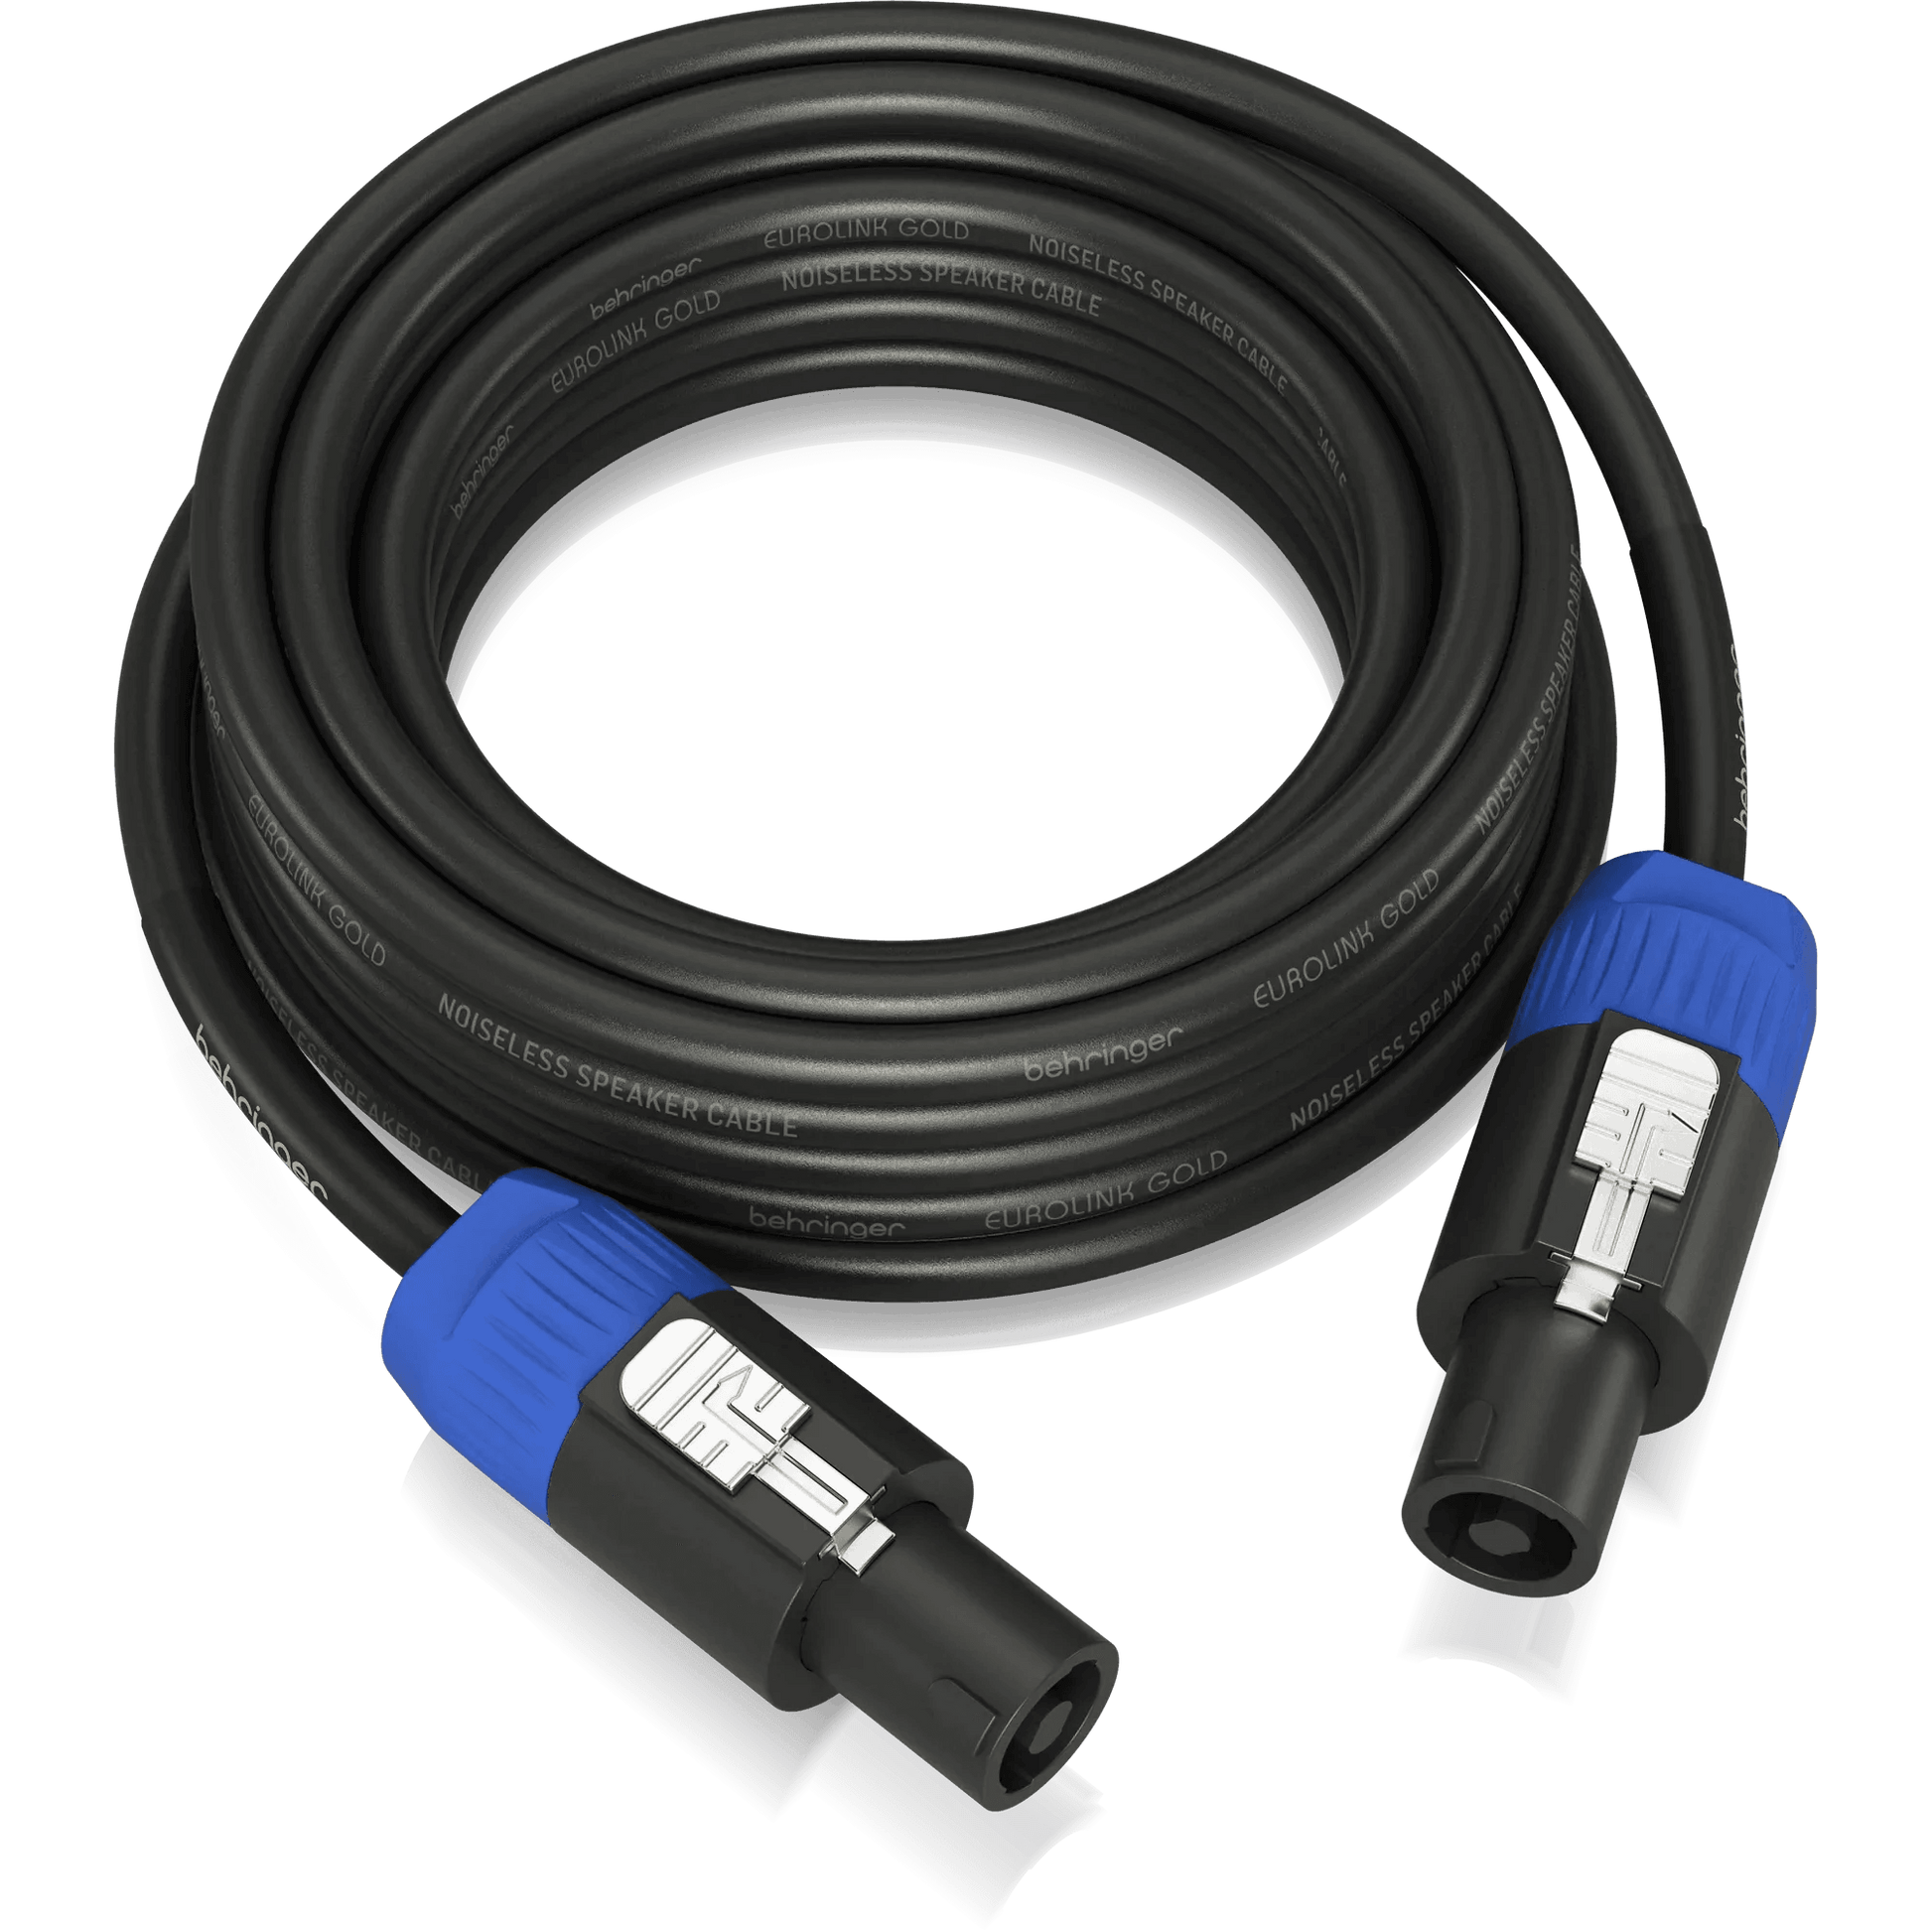 Behringer GLC2-1000 Gold Performance 10 m (32.8 ft) Speaker Cable with Speaker Twist Connectors